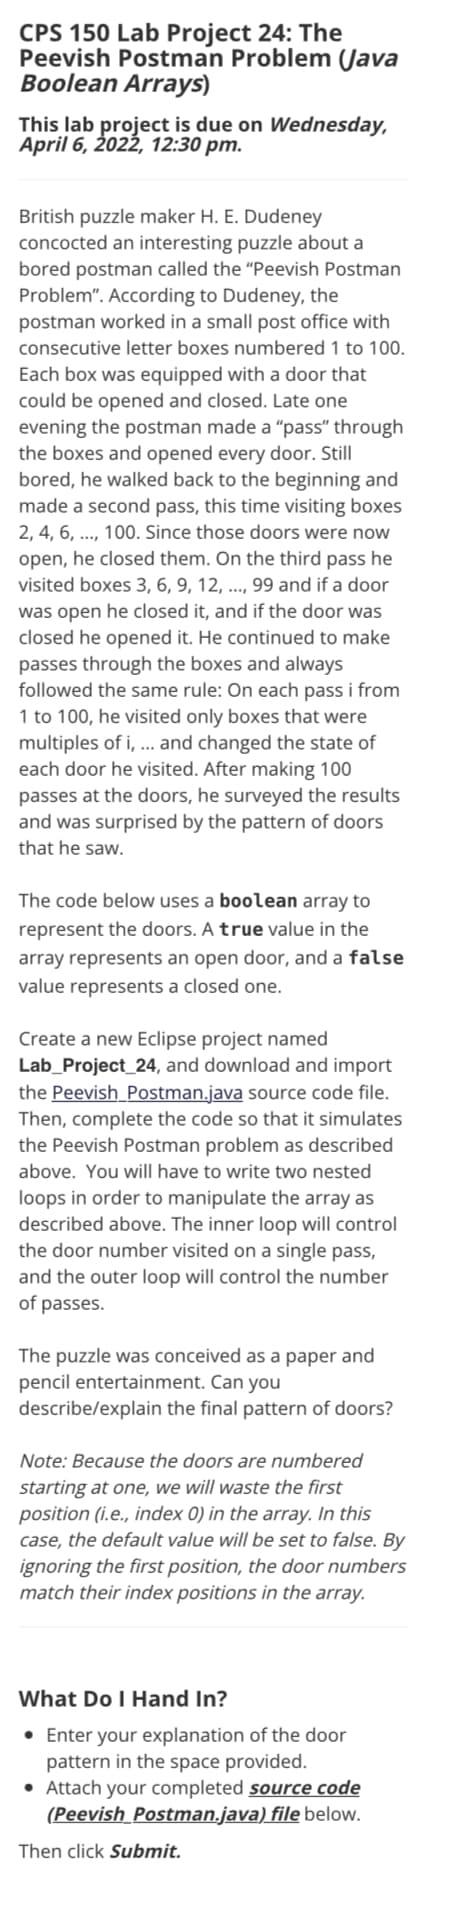 CPS 150 Lab Project 24: The
Peevish Postman Problem (Java
Boolean Arrays)
This lab project is due on Wednesday,
April 6, 2022, 12:30 pm.
British puzzle maker H. E. Dudeney
concocted an interesting puzzle about a
bored postman called the "Peevish Postman
Problem". According to Dudeney, the
postman worked in a small post office with
consecutive letter boxes numbered 1 to 100.
Each box was equipped with a door that
could be opened and closed. Late one
evening the postman made a "pass" through
the boxes and opened every door. Still
bored, he walked back to the beginning and
made a second pass, this time visiting boxes
2, 4, 6, .., 100. Since those doors were now
open, he closed them. On the third pass he
visited boxes 3, 6, 9, 12, ..., 99 and if a door
was open he closed it, and if the door was
closed he opened it. He continued to make
passes through the boxes and always
followed the same rule: On each pass i from
1 to 100, he visited only boxes that were
multiples of i, ... and changed the state of
each door he visited. After making 100
passes at the doors, he surveyed the results
and was surprised by the pattern of doors
that he saw.
The code below uses a boolean array to
represent the doors. A true value in the
array represents an open door, and a false
value represents a closed one.
Create a new Eclipse project named
Lab_Project_24, and download and import
the Peevish_Postman.java source code file.
Then, complete the code so that it simulates
the Peevish Postman problem as described
above. You will have to write two nested
loops in order to manipulate the array as
described above. The inner loop will control
the door number visited on a single pass,
and the outer loop will control the number
of passes.
The puzzle was conceived as a paper and
pencil entertainment. Can you
describe/explain the final pattern of doors?
Note: Because the doors are numbered
starting at one, we will waste the first
position (i.e., index 0) in the array. In this
case, the default value will be set to false. By
ignoring the first position, the door numbers
match their index positions in the array.
What Do I Hand In?
• Enter your explanation of the door
pattern in the space provided.
• Attach your completed source code
(Peevish Postman.java) file below.
Then click Submit.
